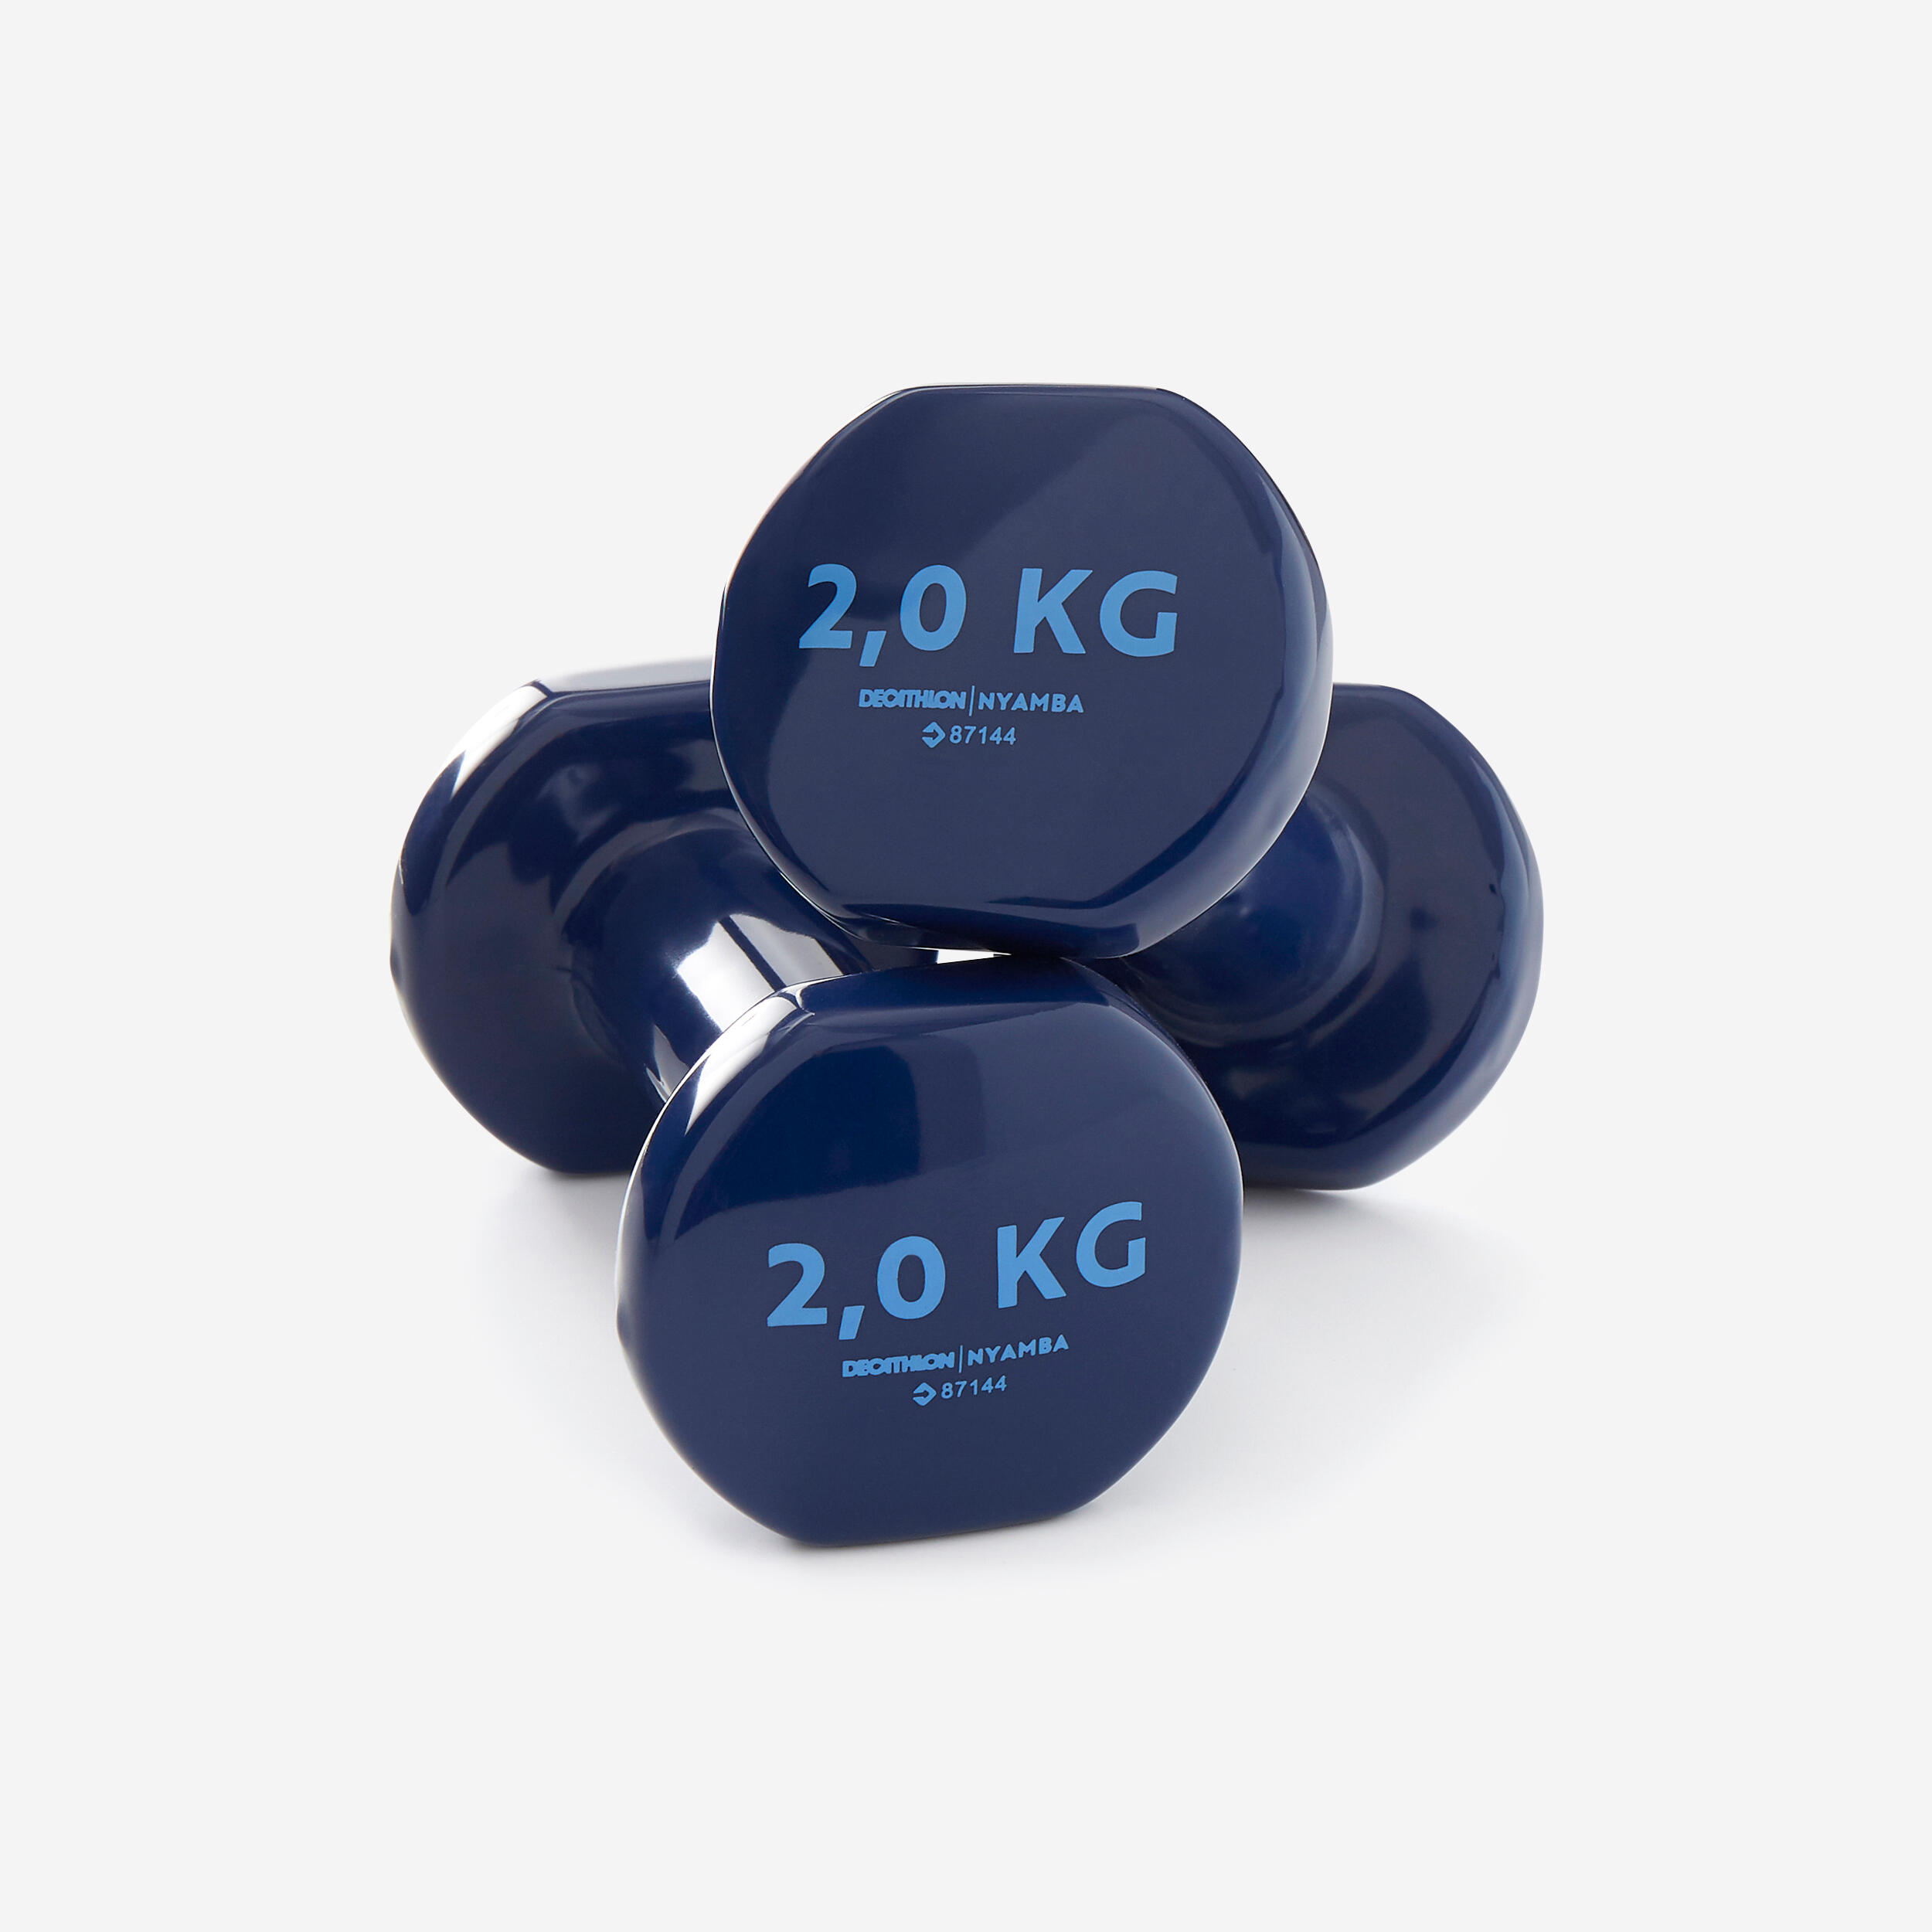 DOMYOS Fitness 2 kg Dumbbells Twin-Pack - Navy Blue